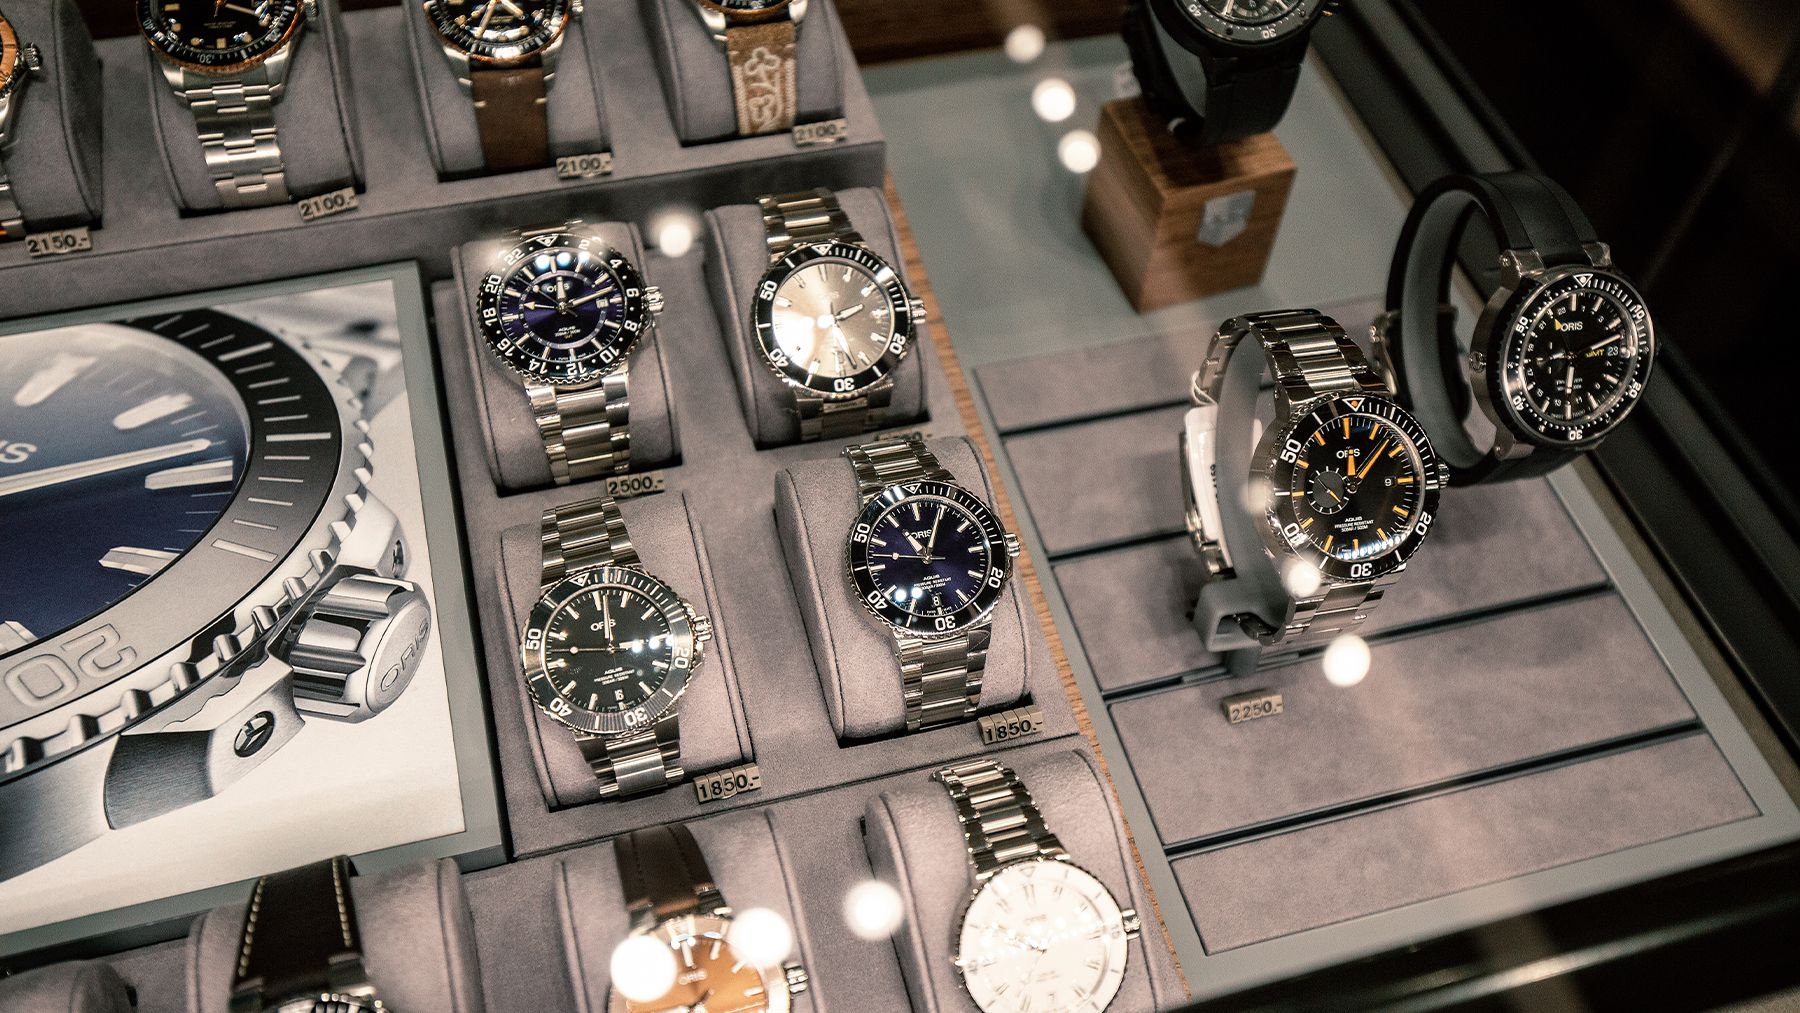 Smartwatches No Longer a Threat to Pricey Swiss Timepieces, Morgan Stanley Says